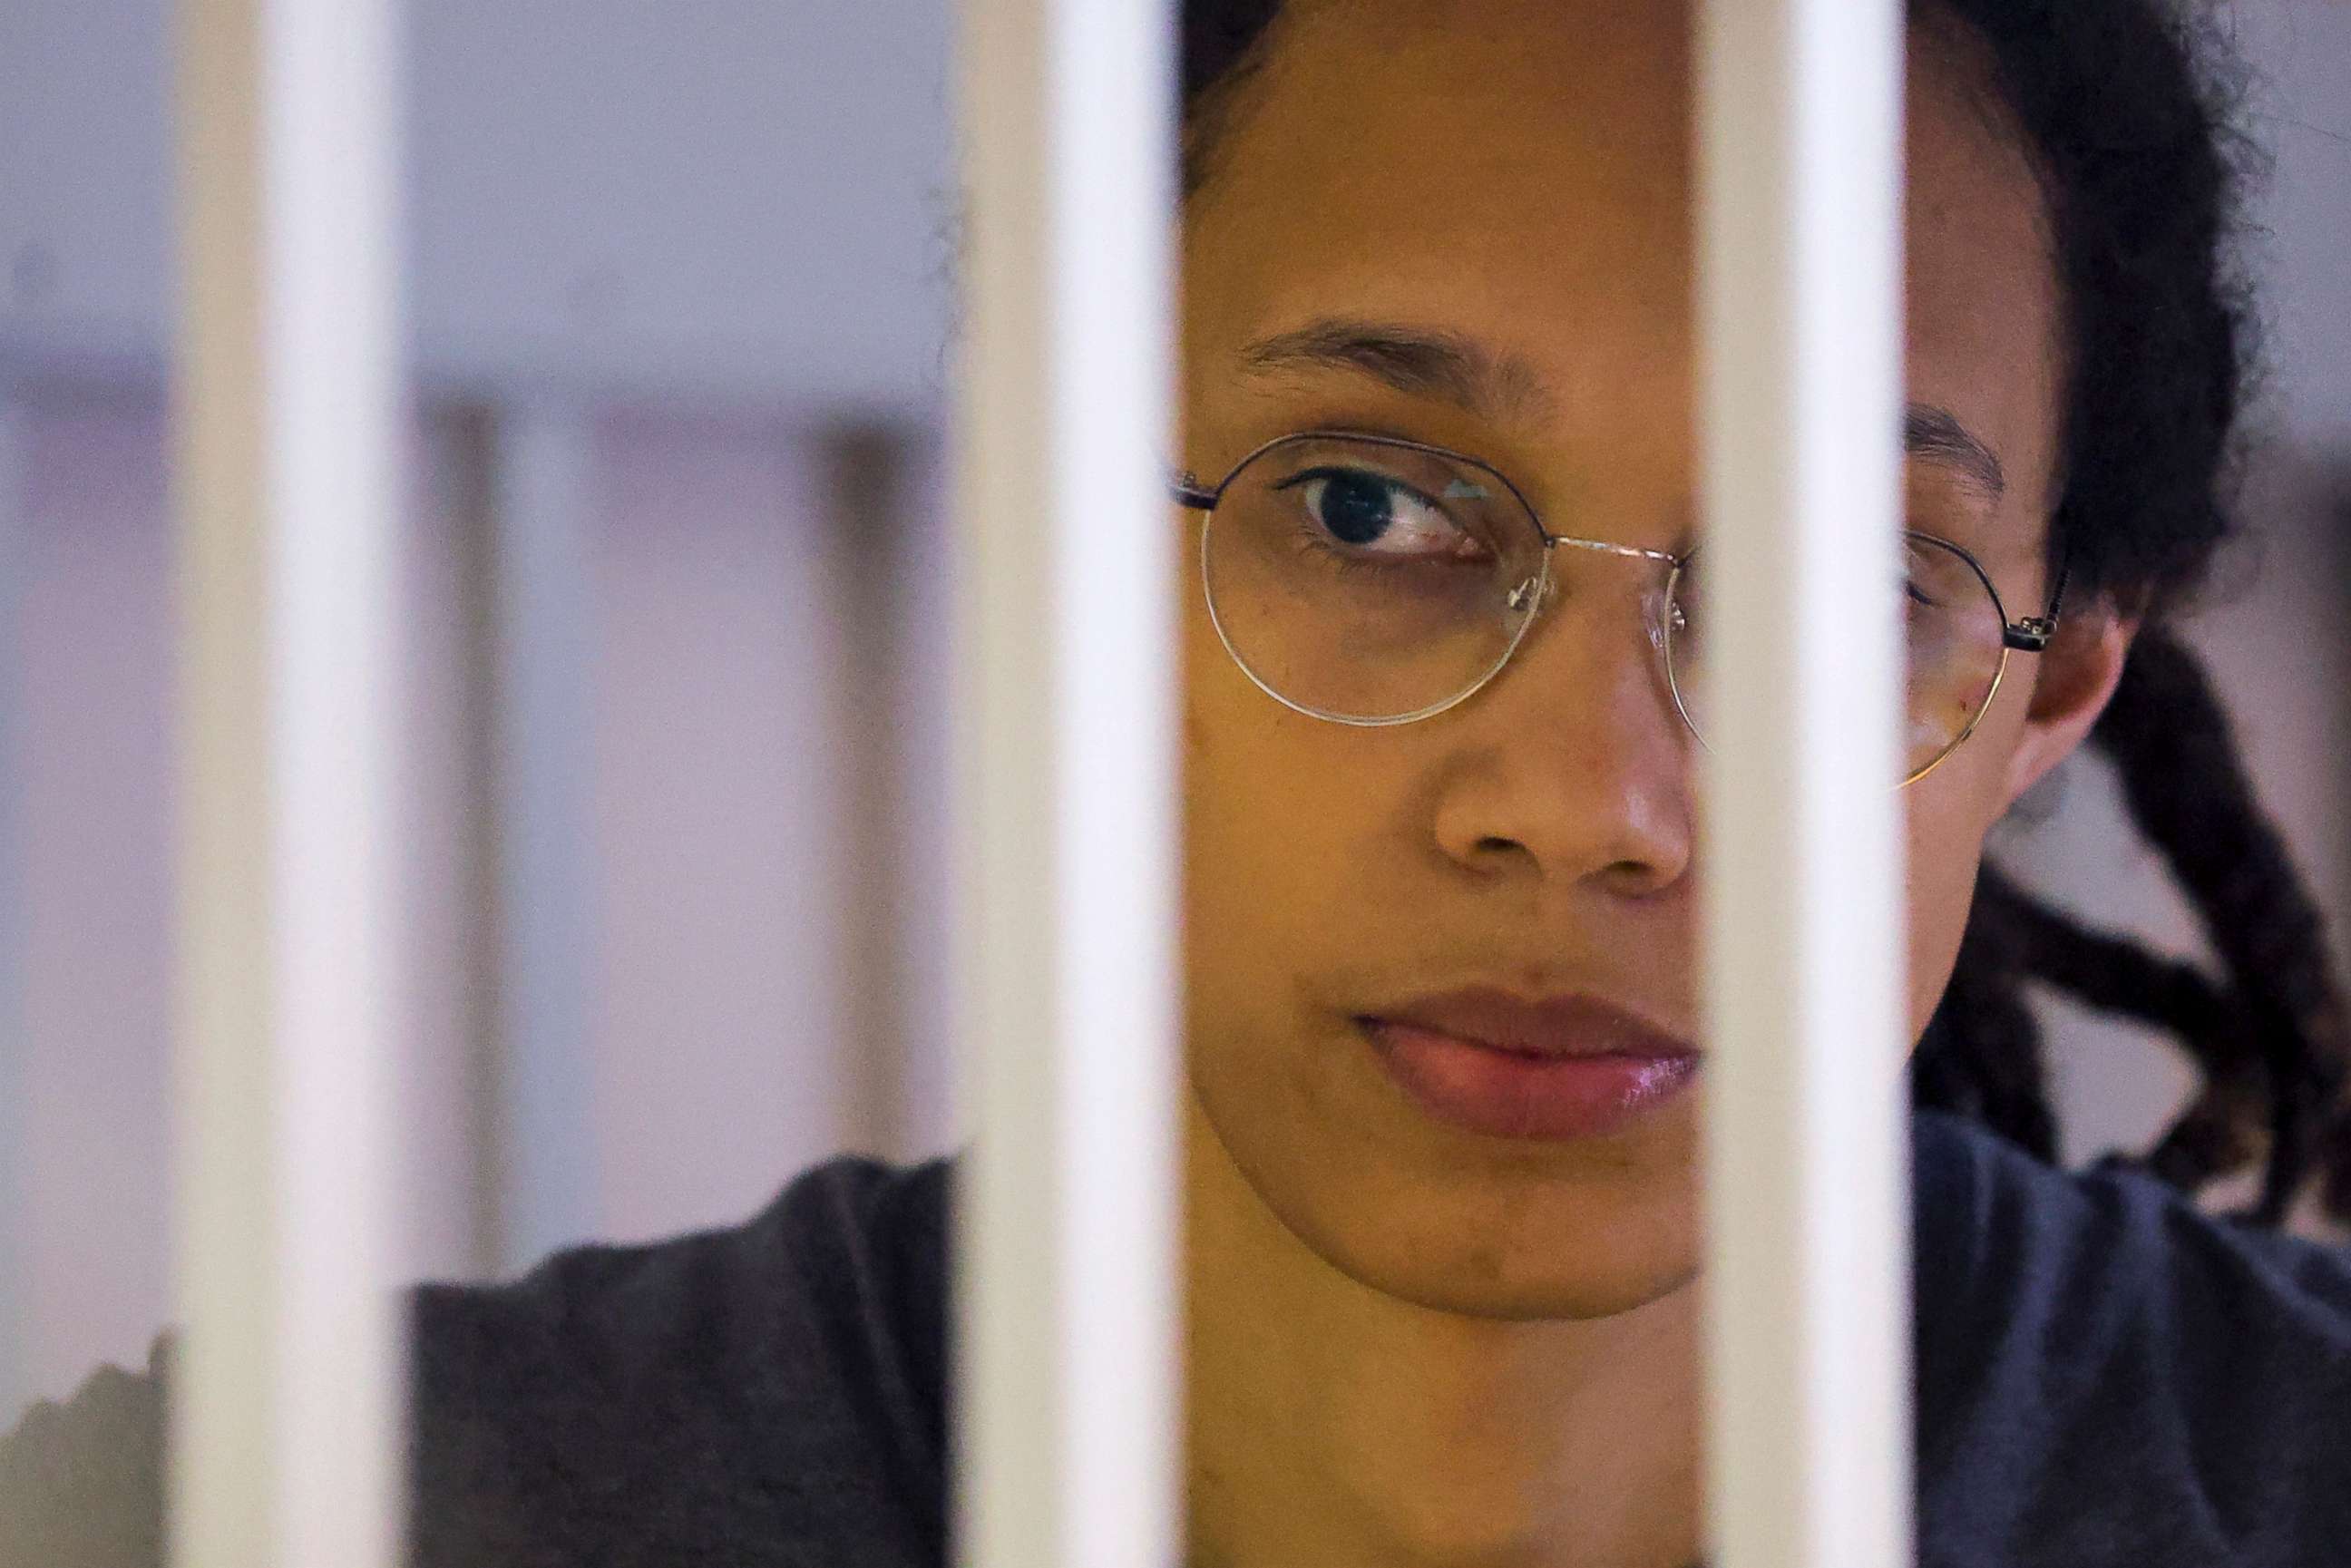 PHOTO: U.S. basketball player Brittney Griner looks through bars as she listens to the verdict standing in a cage in a courtroom in Khimki, outside Moscow, on Aug. 4, 2022.